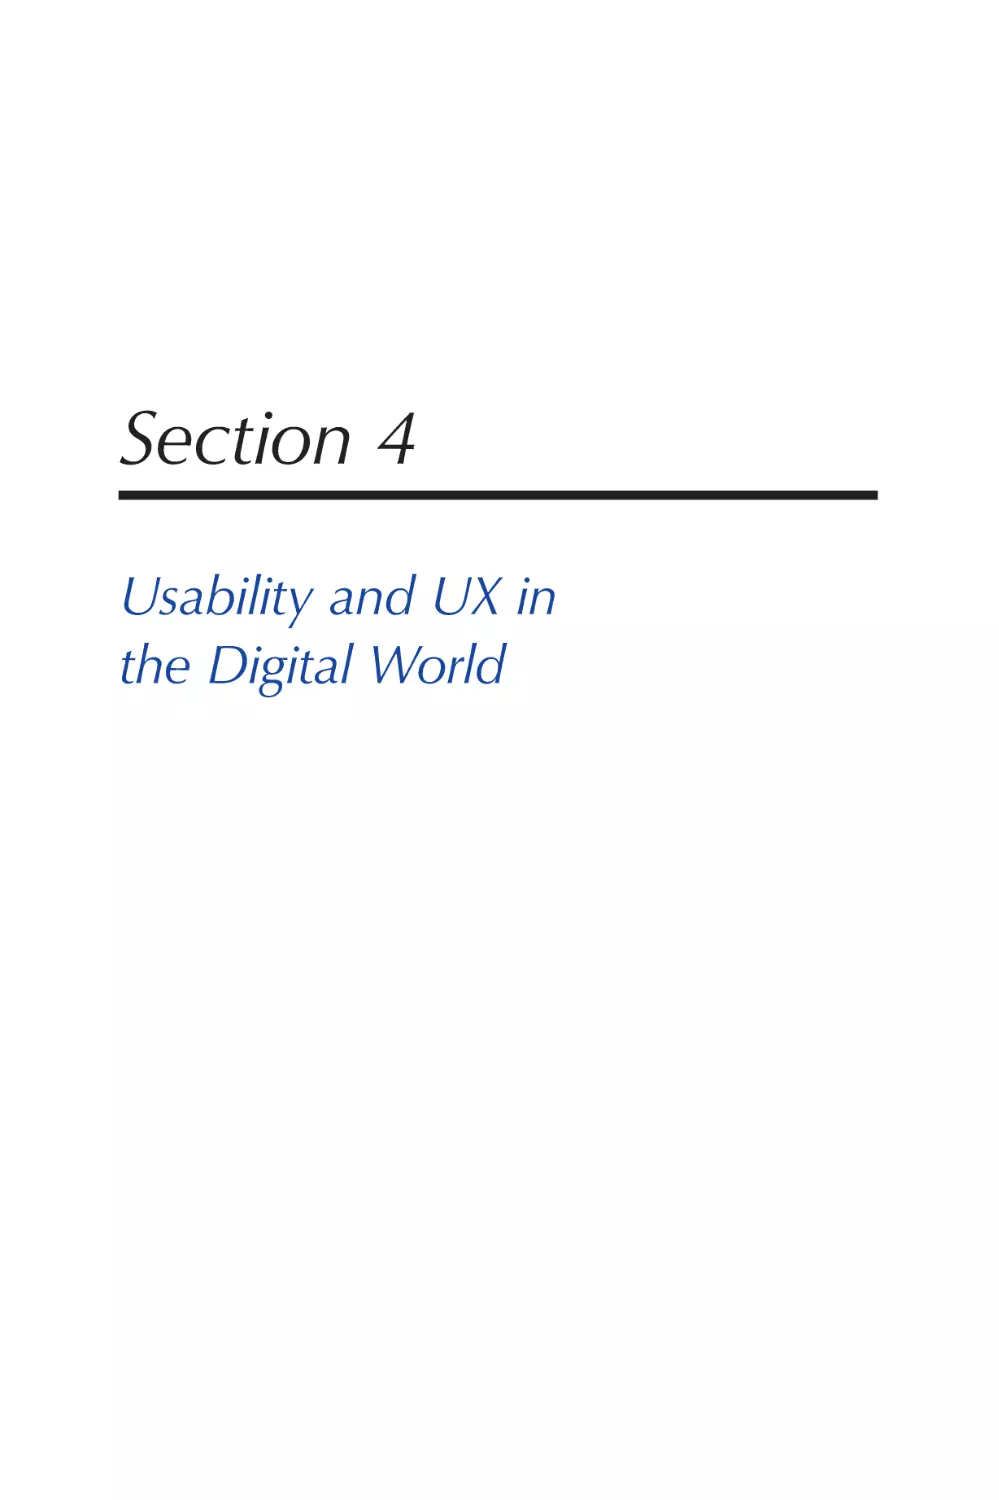 Section 4 Usability and UX in the Digital World